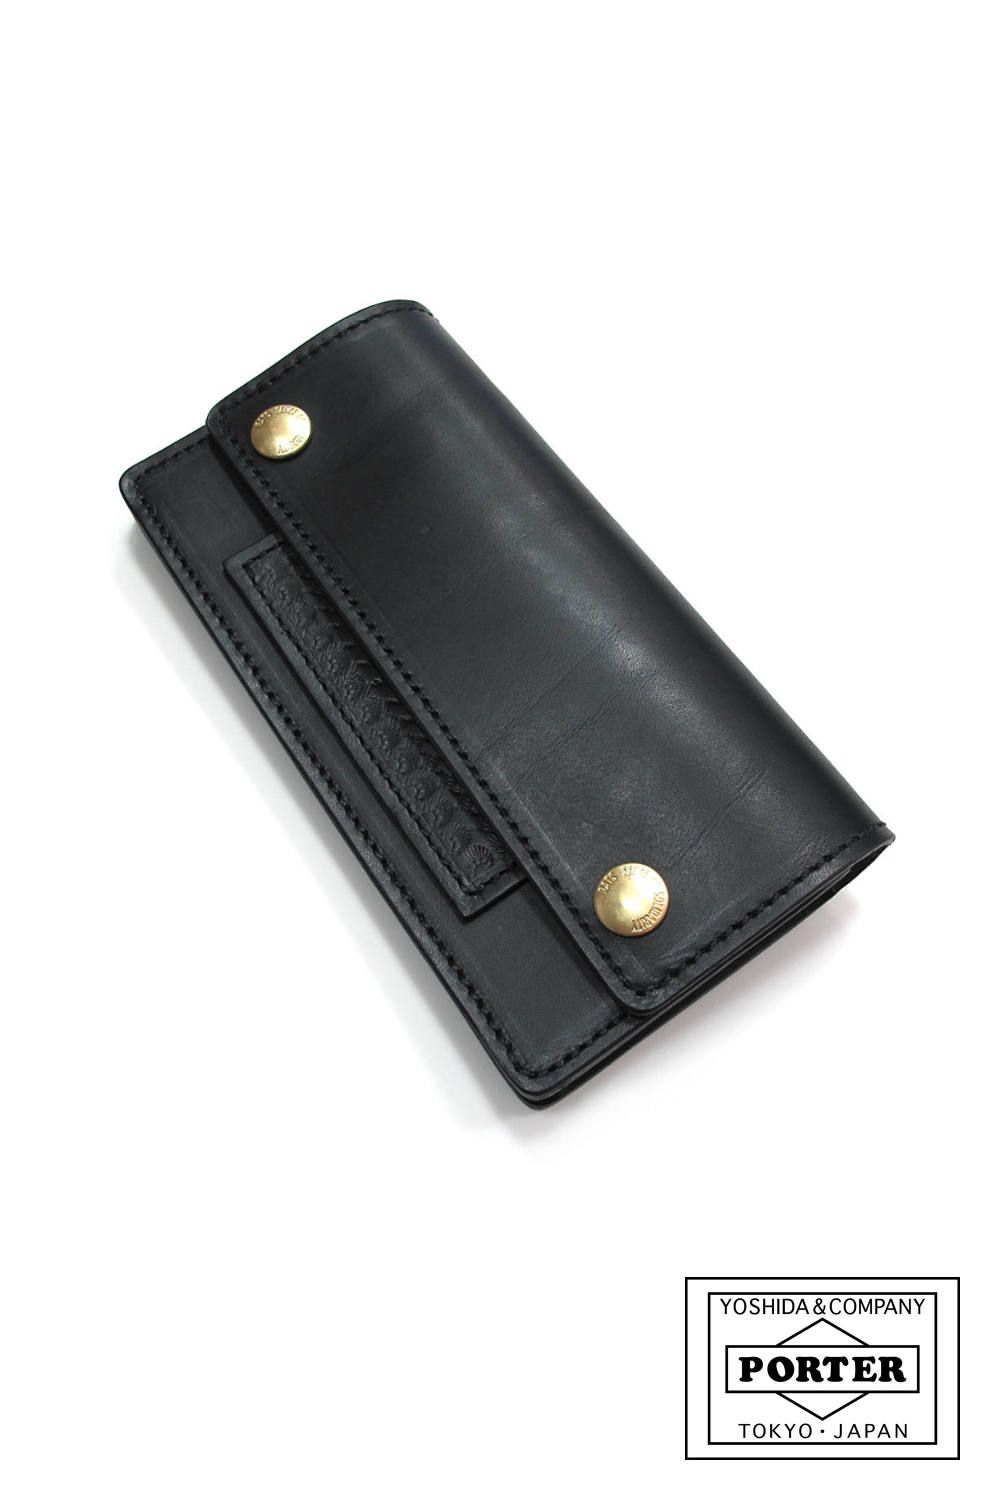 RATS - LEATHER WALLET TYPE C (BLACK) / ポーター コラボレザー 